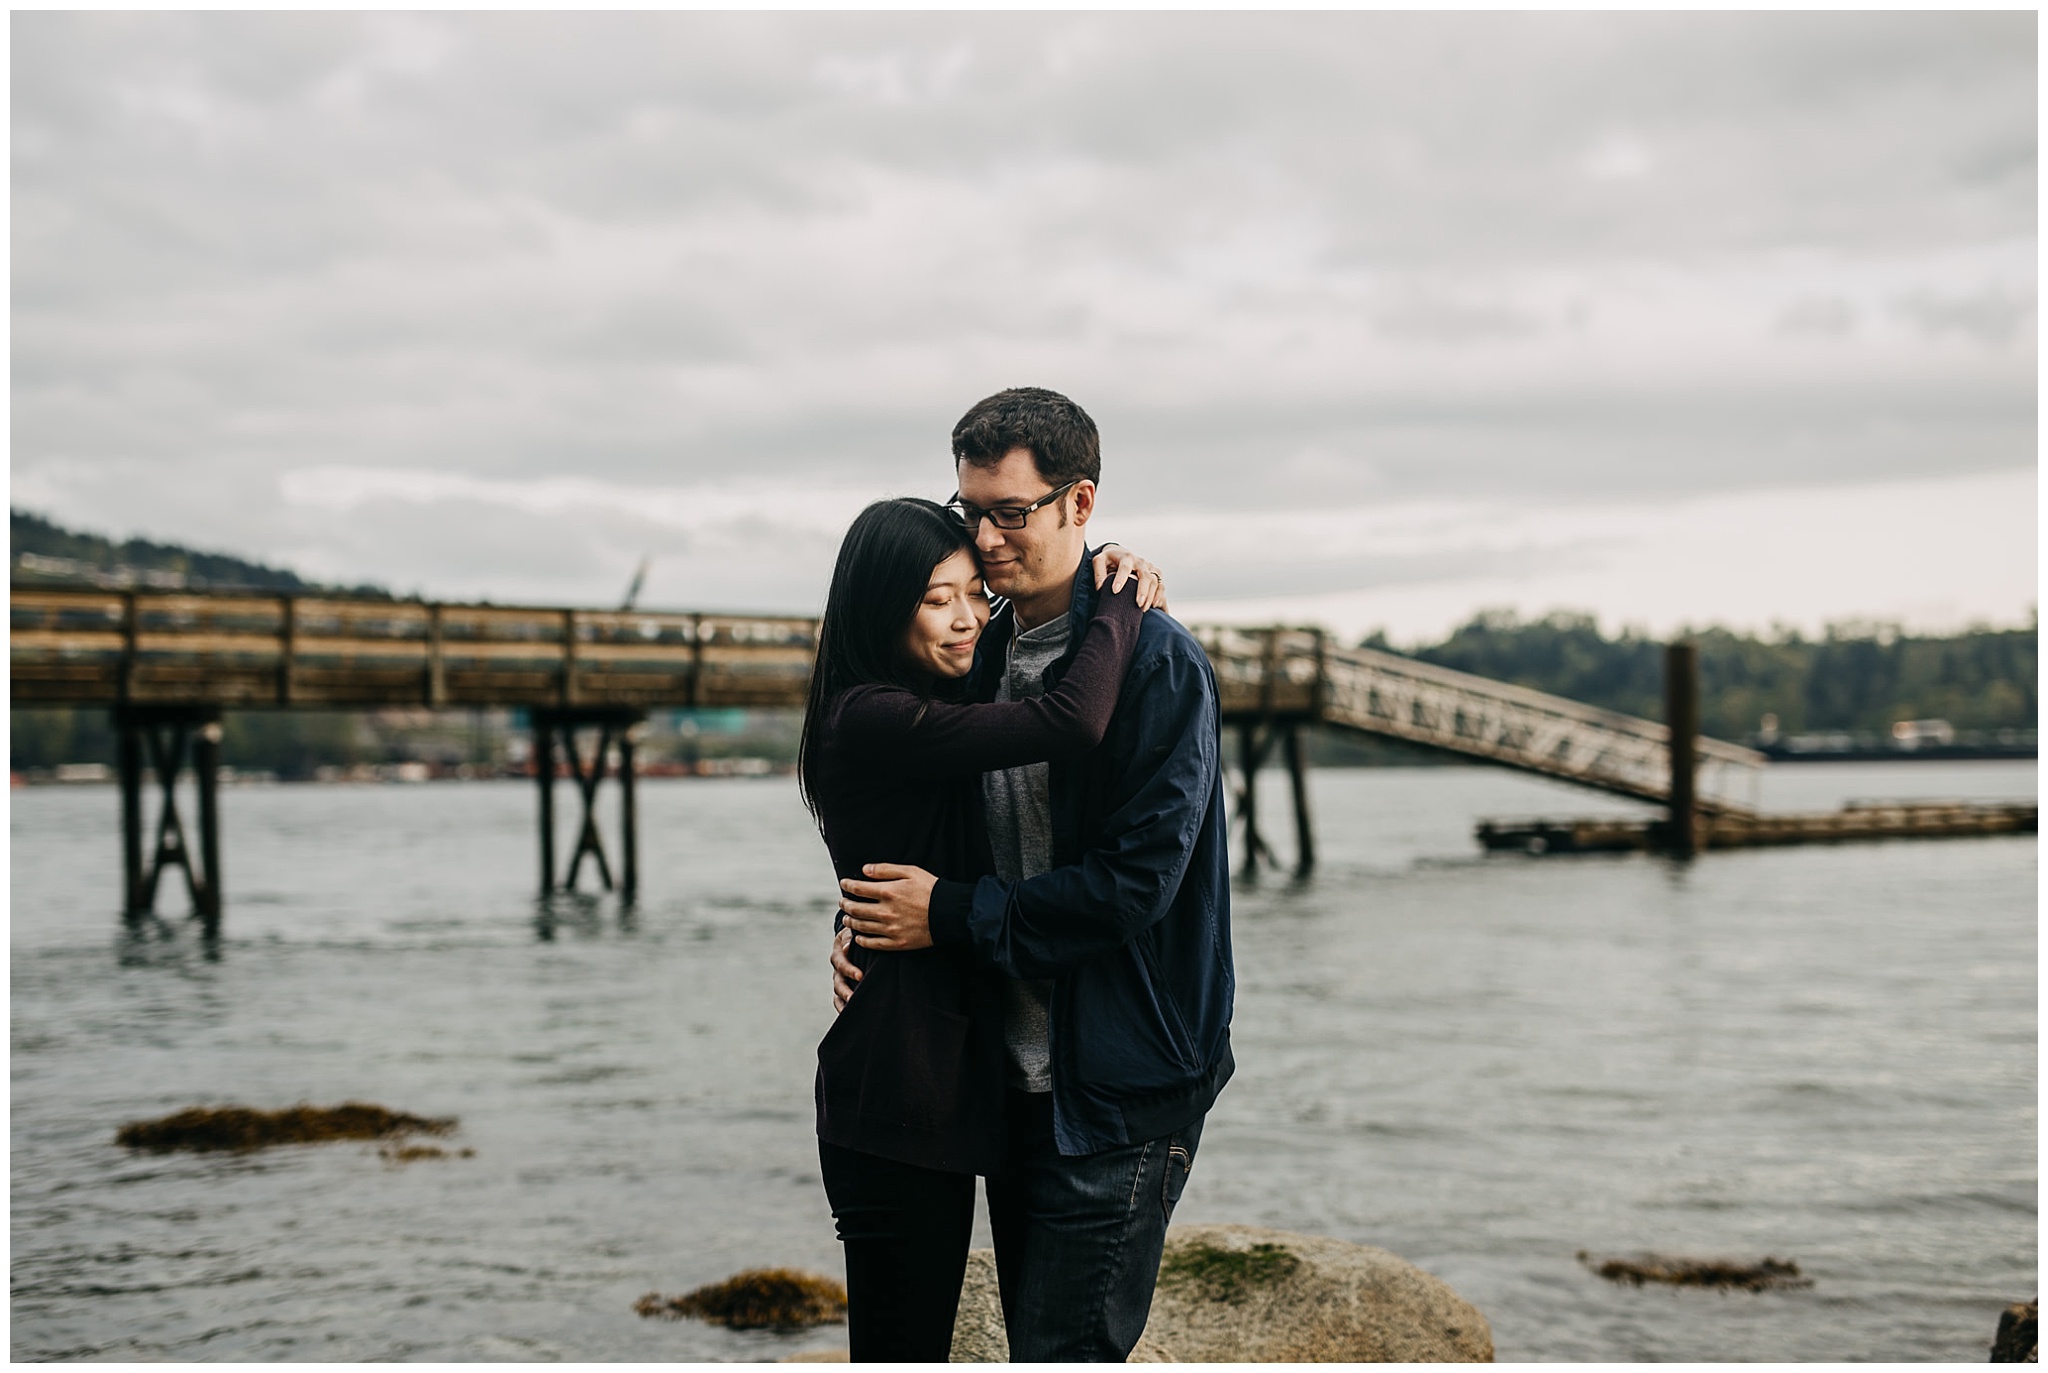 Dating in vancouver in San Diego